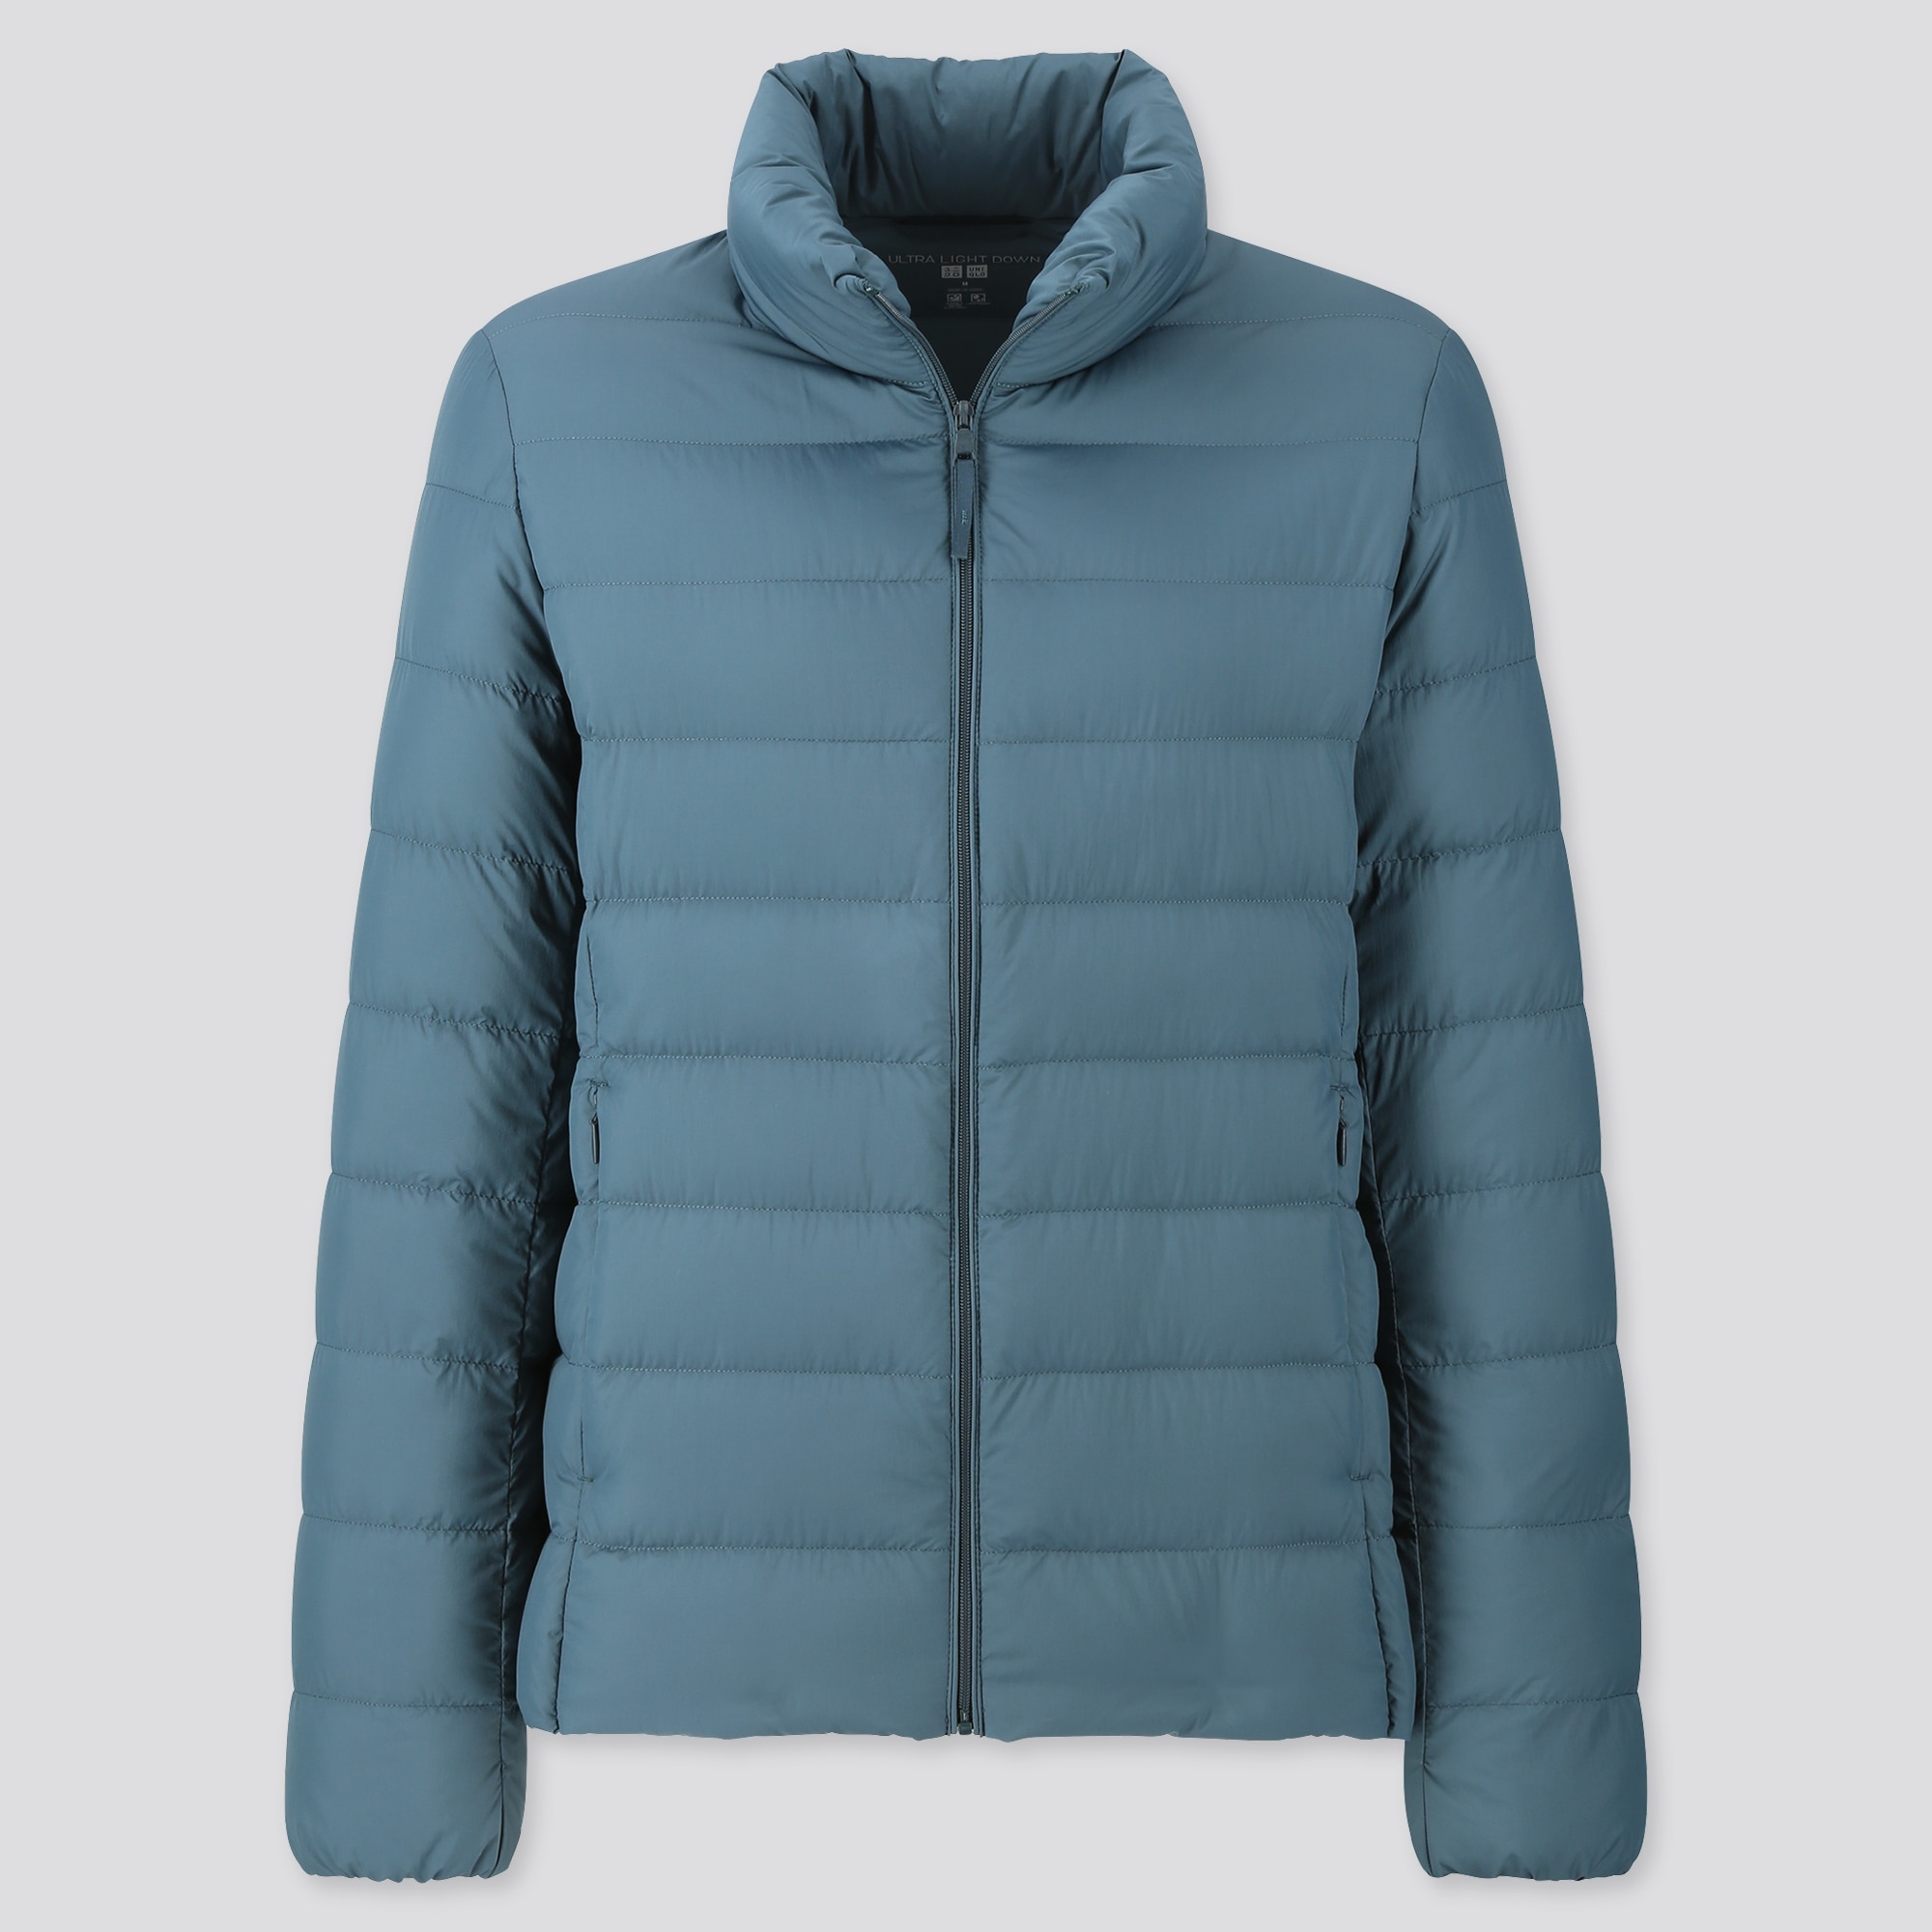 Uniqlo Jacket : Uniqlo S Affordable Hybrid Down Jackets Are Instant ...